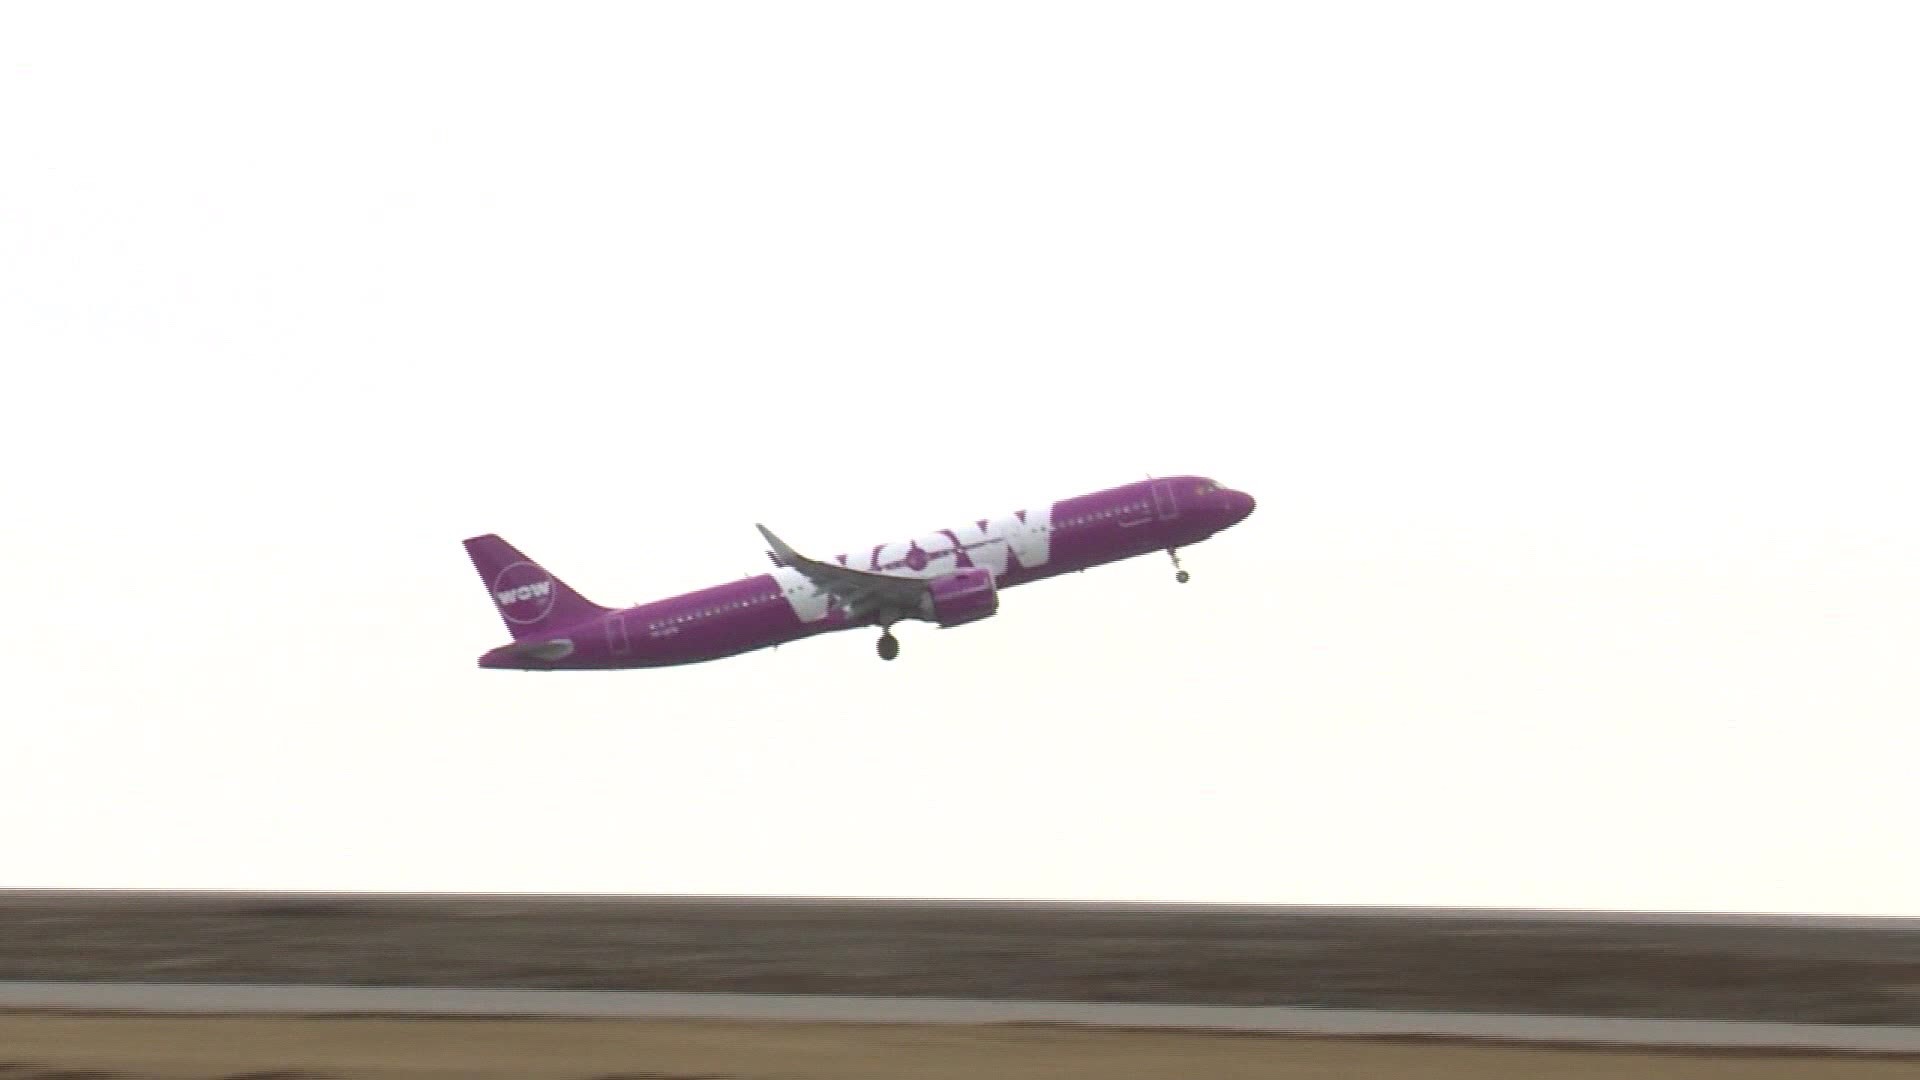 Thousands of customers are stranded and disappointed after WOW Air cancels all flights and stops all operations.